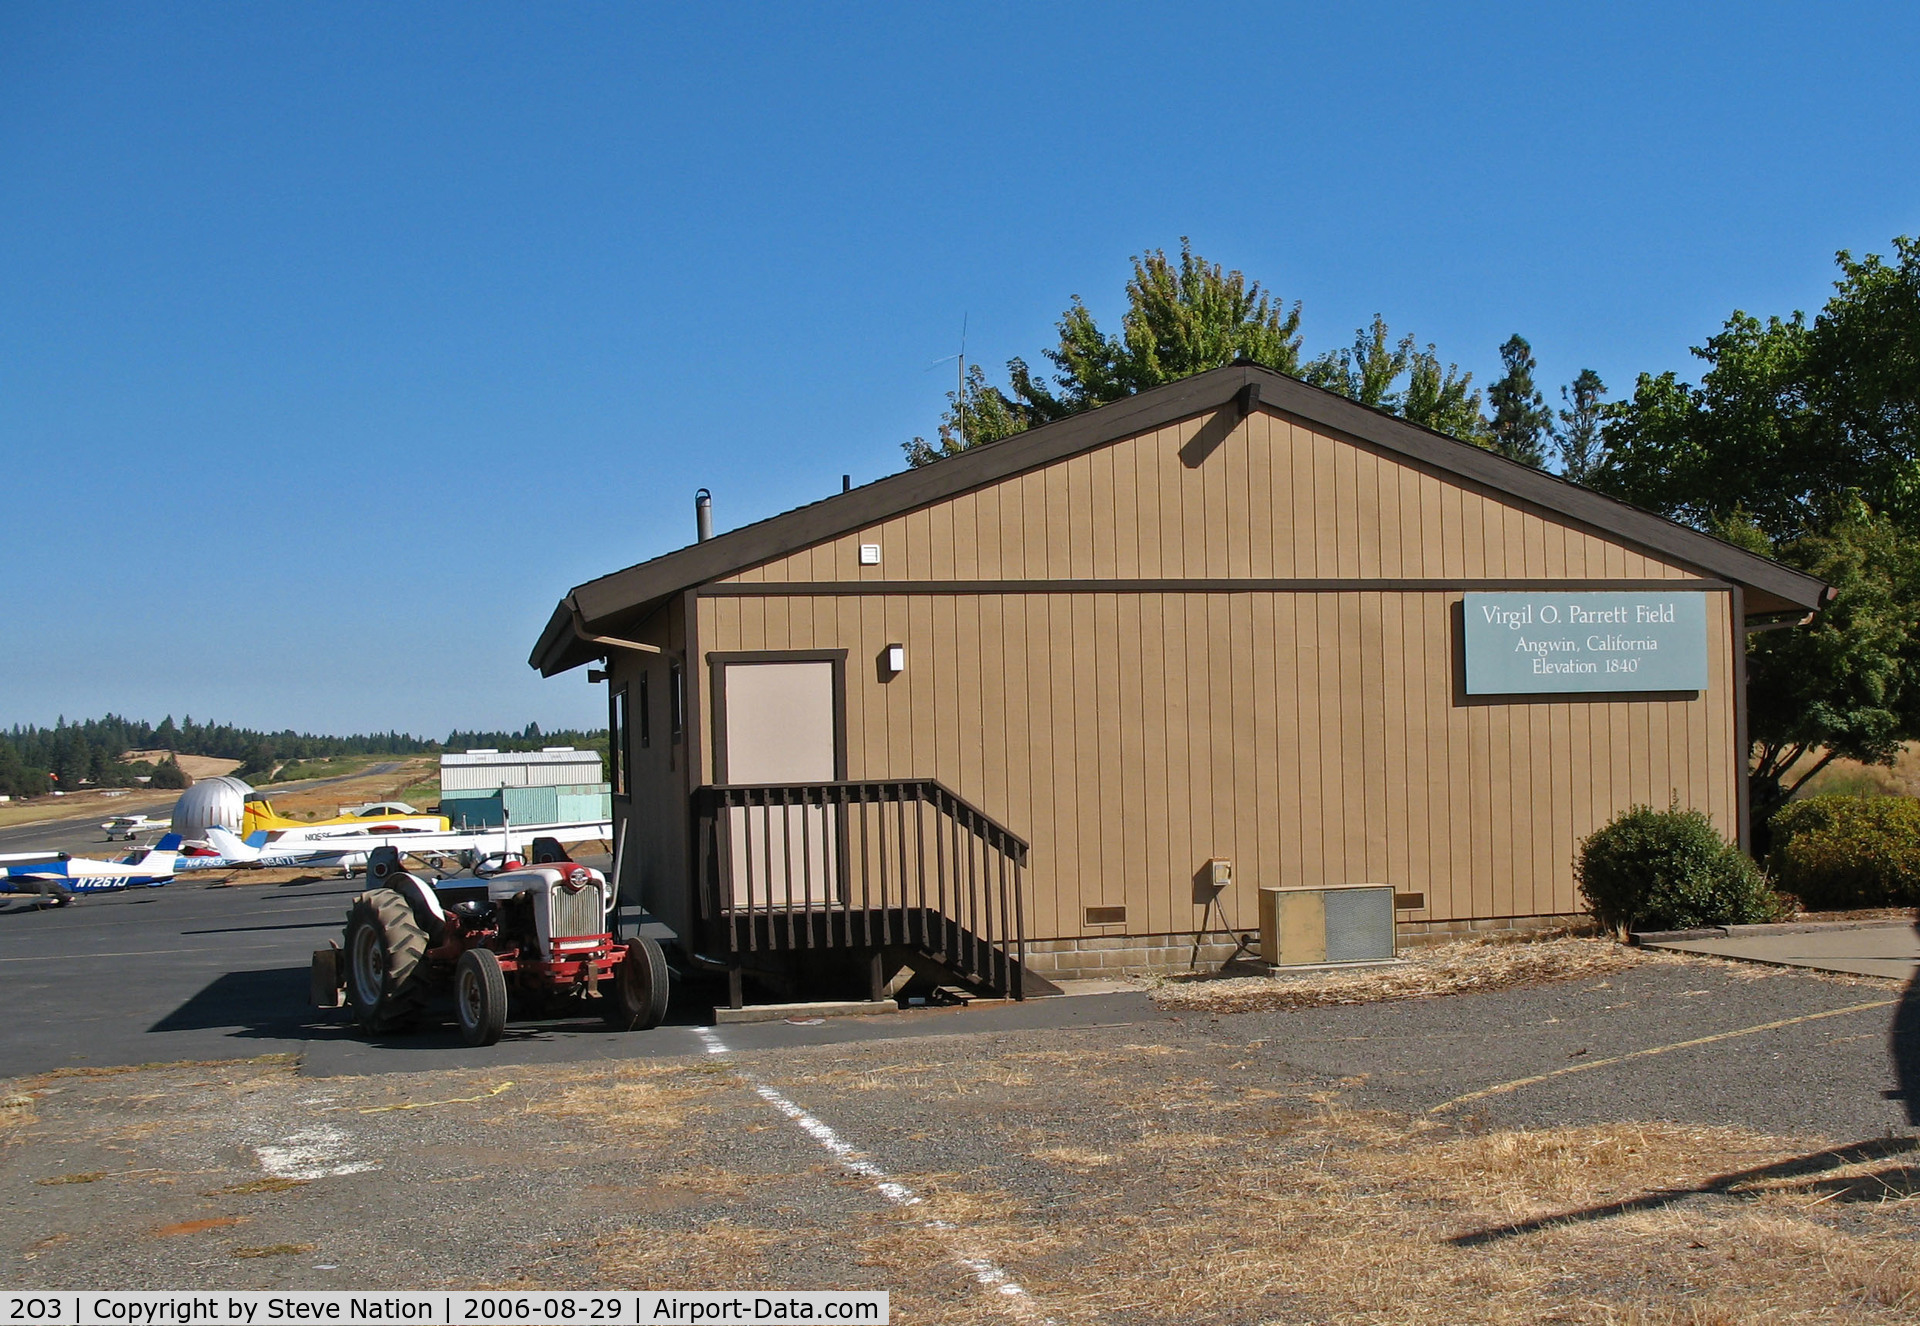 Angwin-parrett Field Airport (2O3) - Pacific Union College aviation program offices and pilot center at Virgil O. Parrett Field, Angwin, CA 